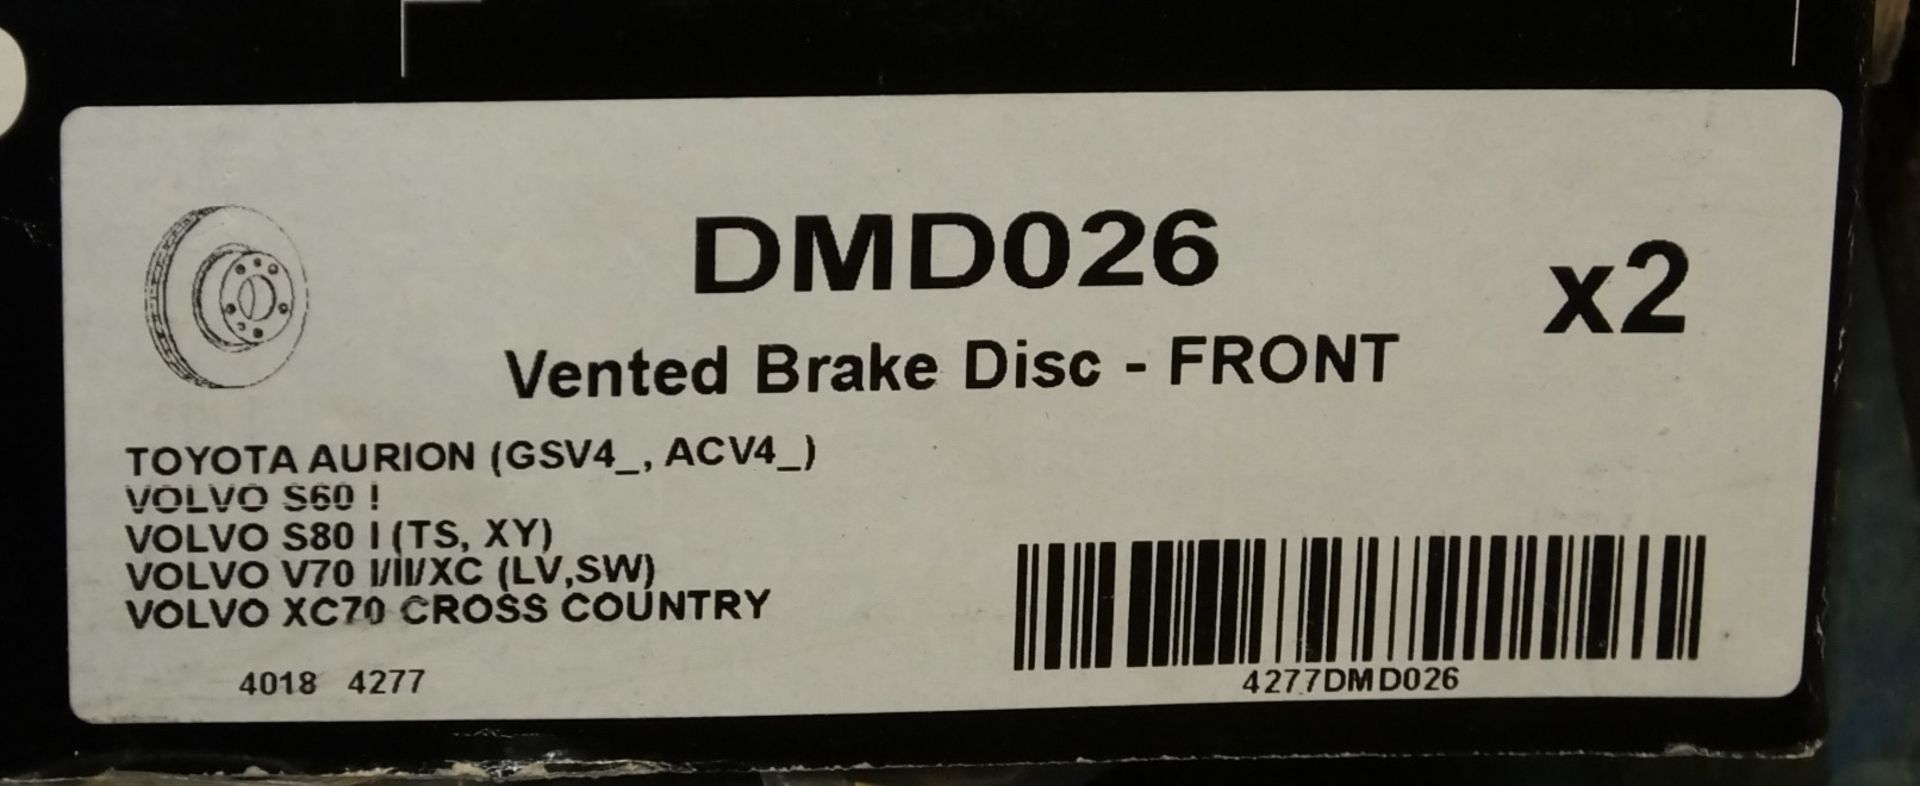 2x Drivemaster Brake Disc Sets - Please see pictures for model numbers - Image 3 of 3